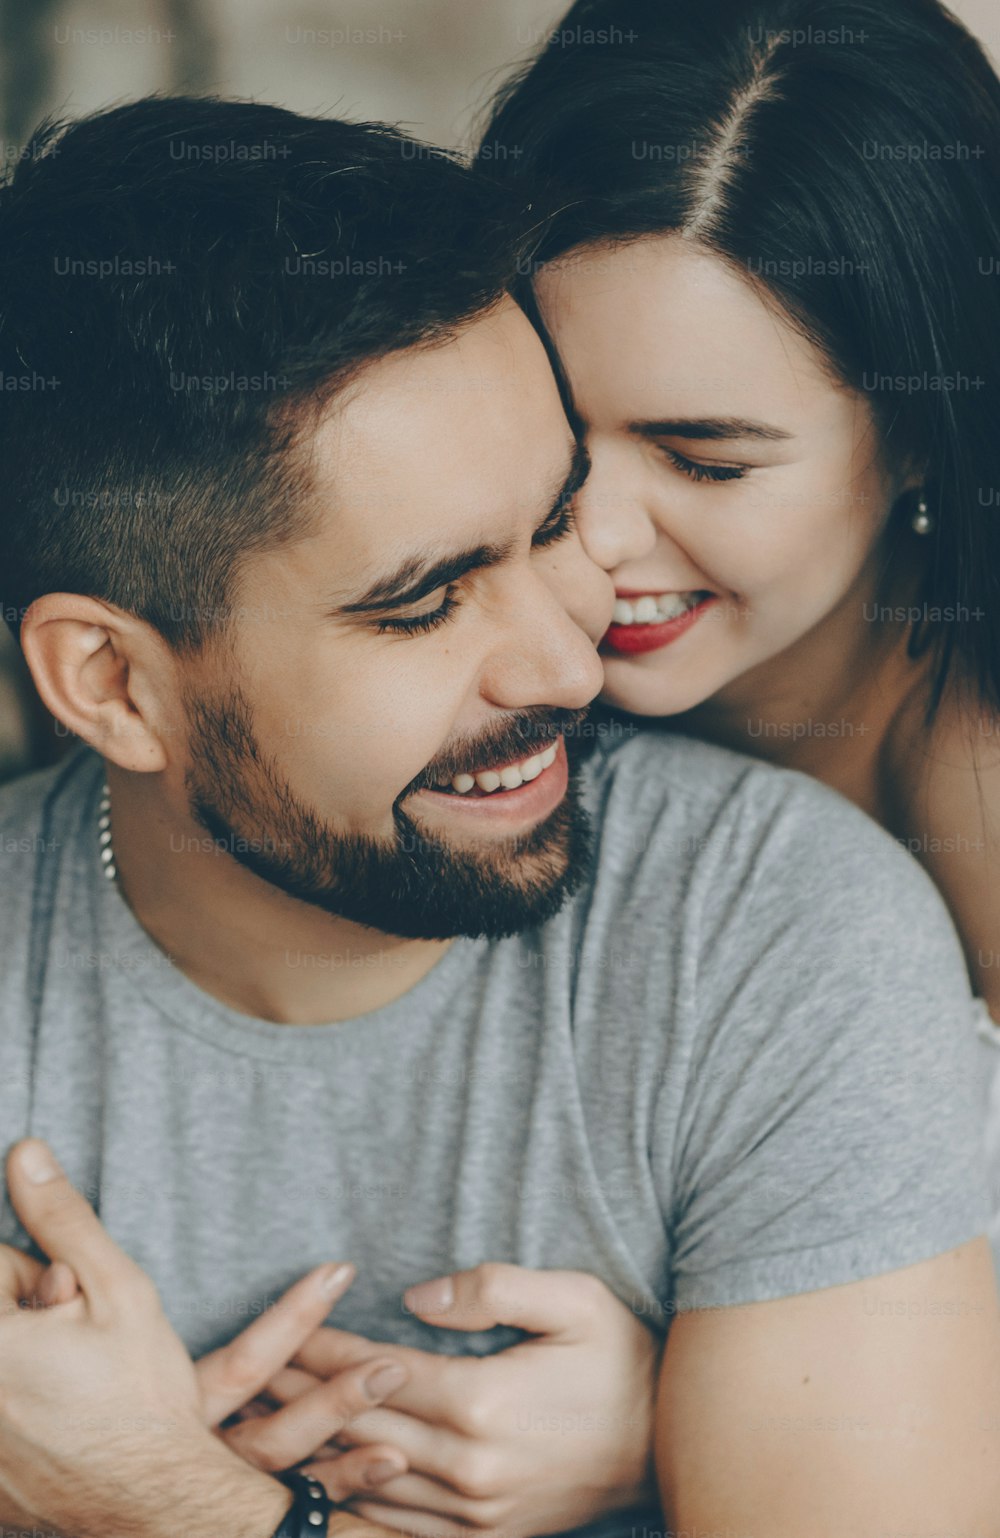 Cheerful caucasian brunette is embracing her bearded lover while smiling and having fun together